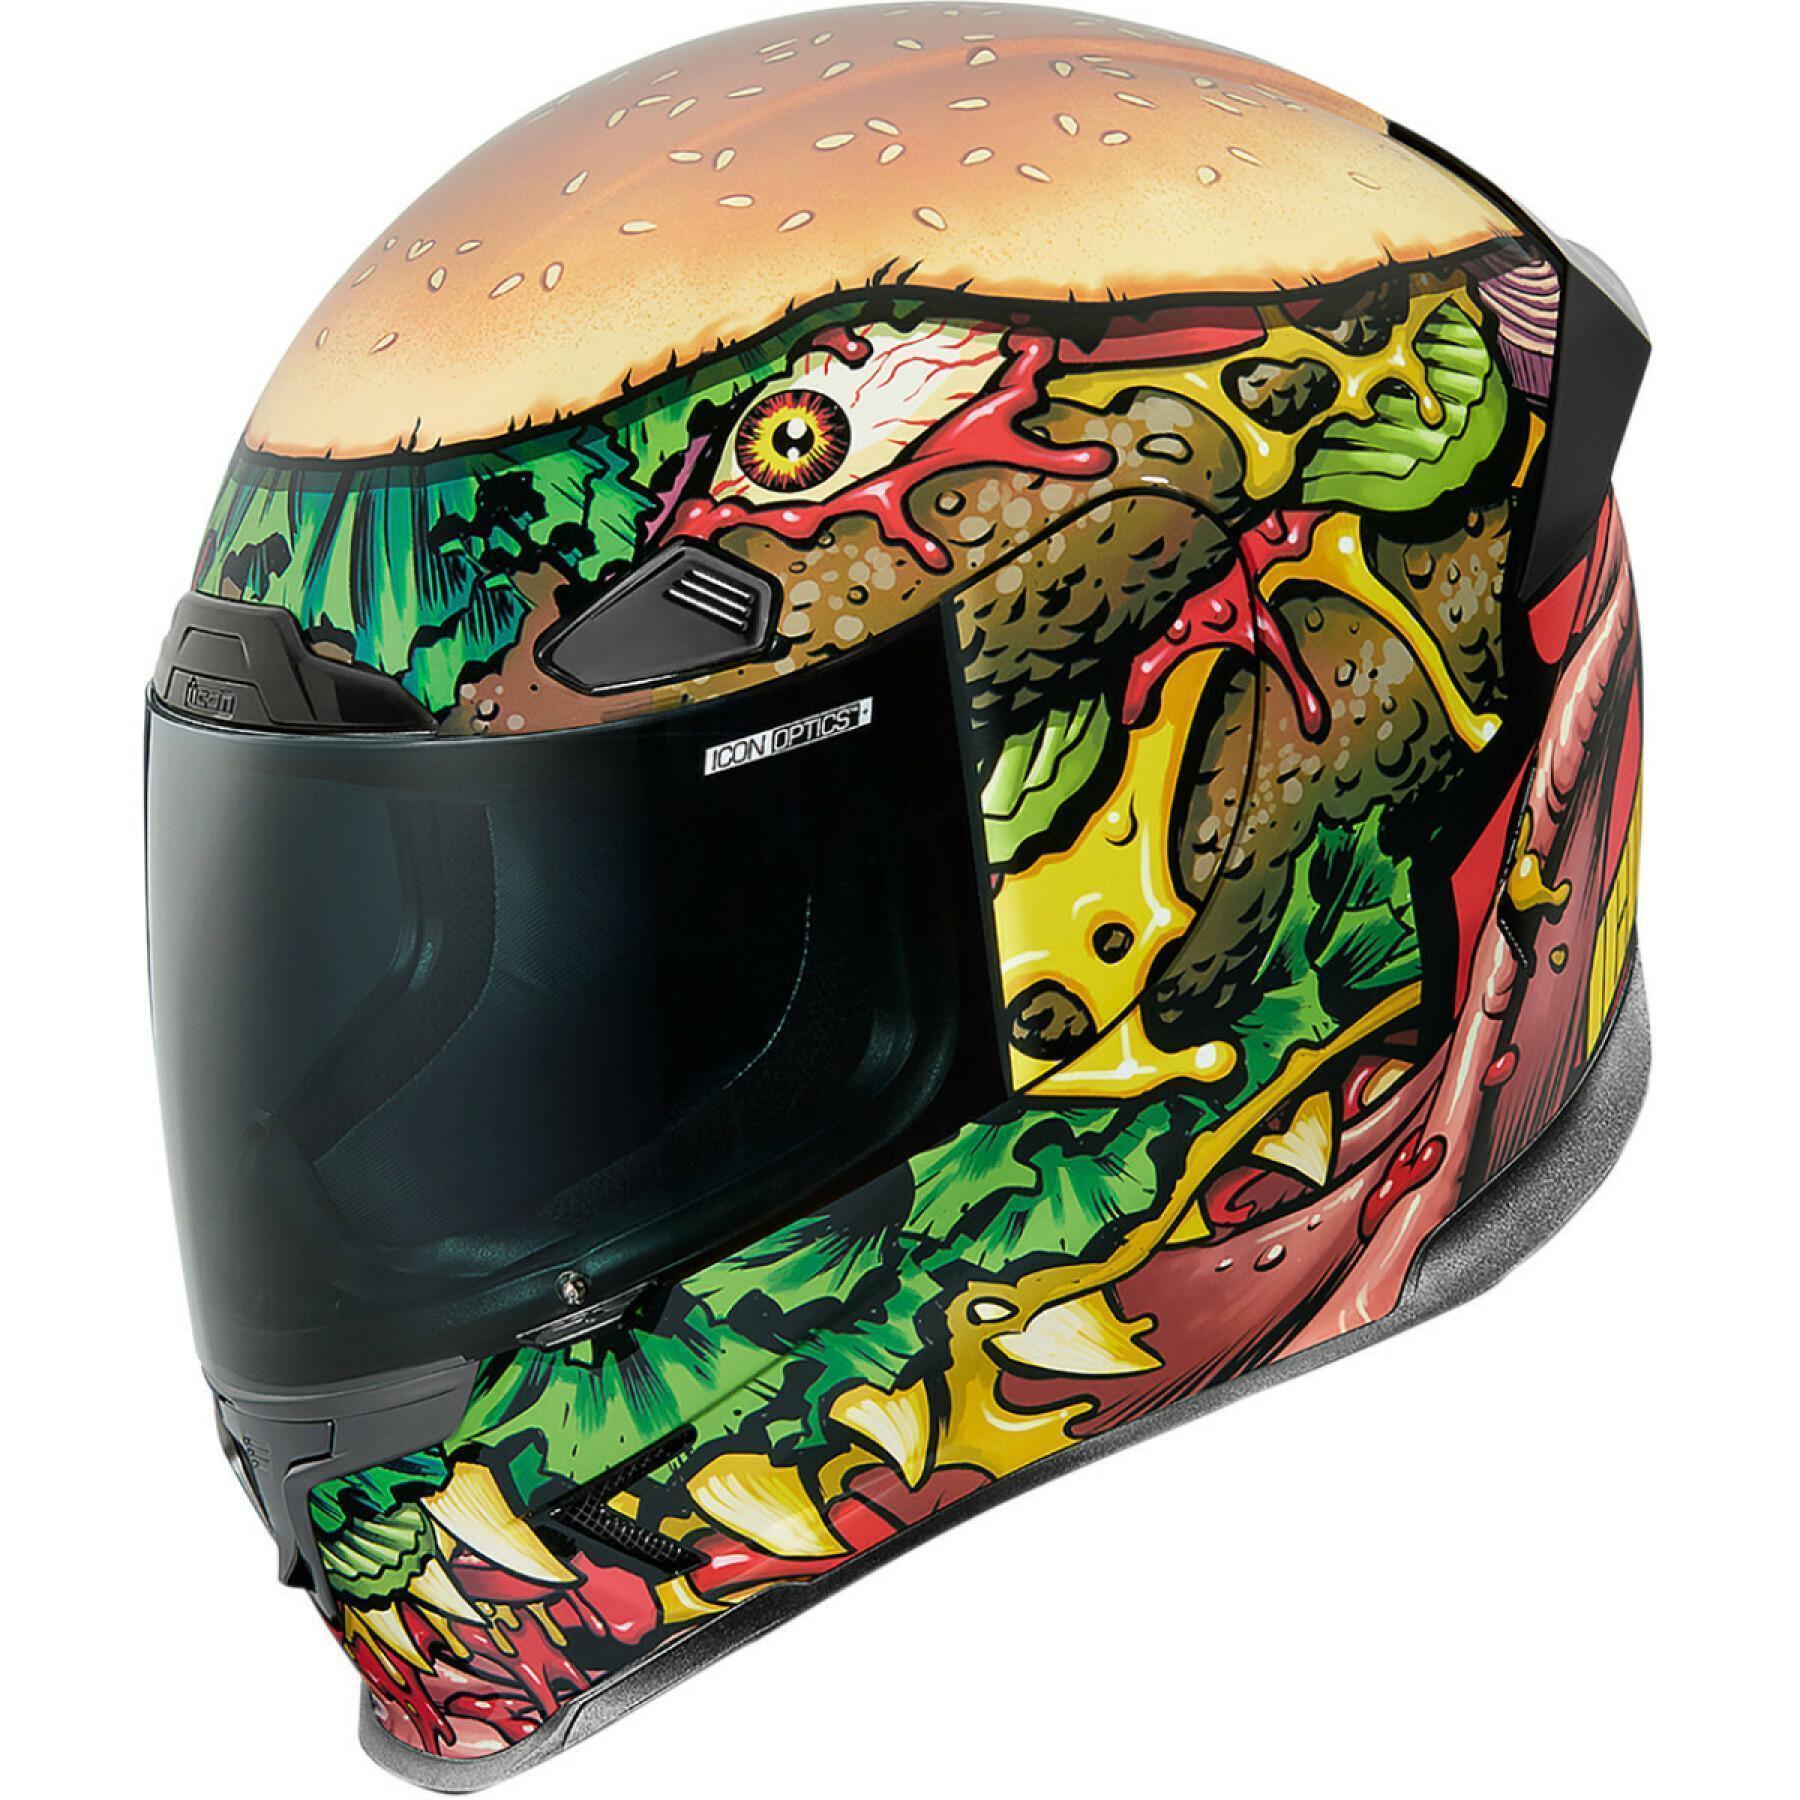 Full face motorcycle helmet Icon afp fastfood